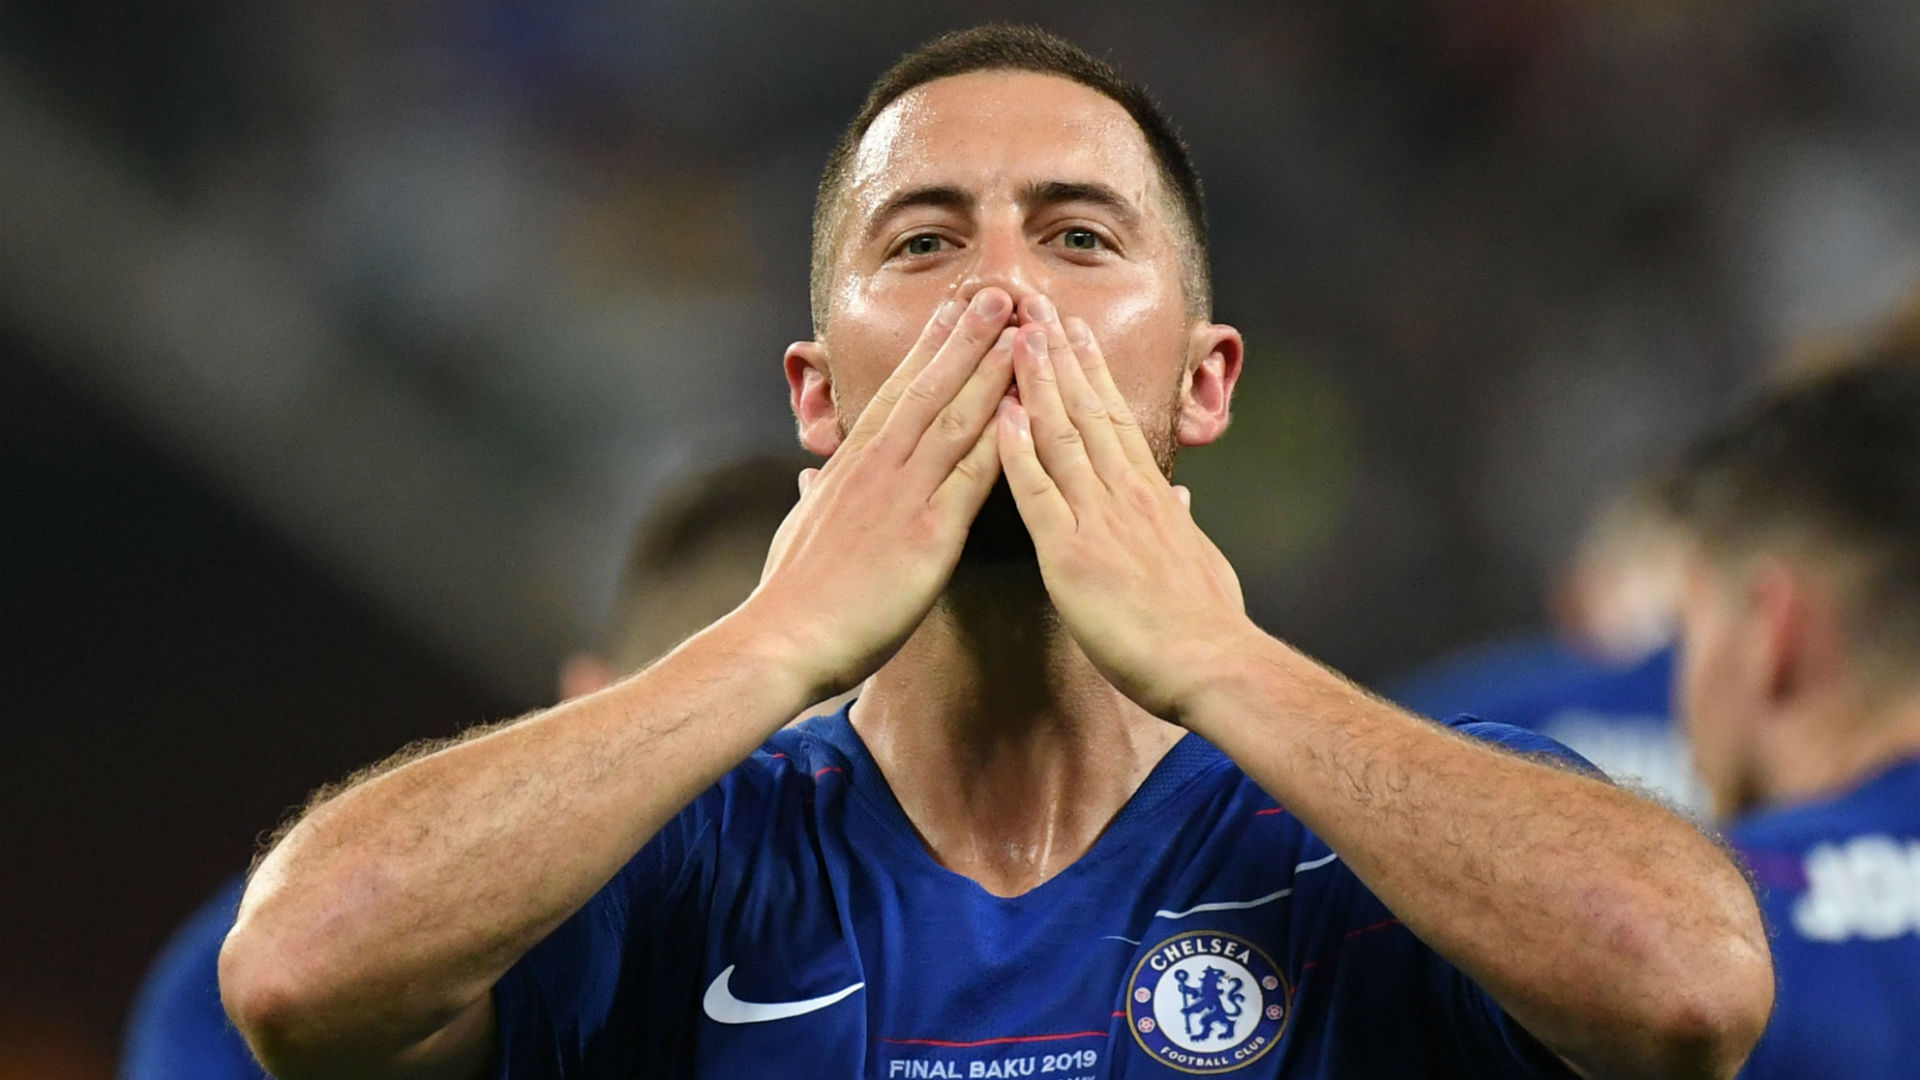 Sassuolo's Boga names ex-Chelsea star Hazard as most talented he's played with